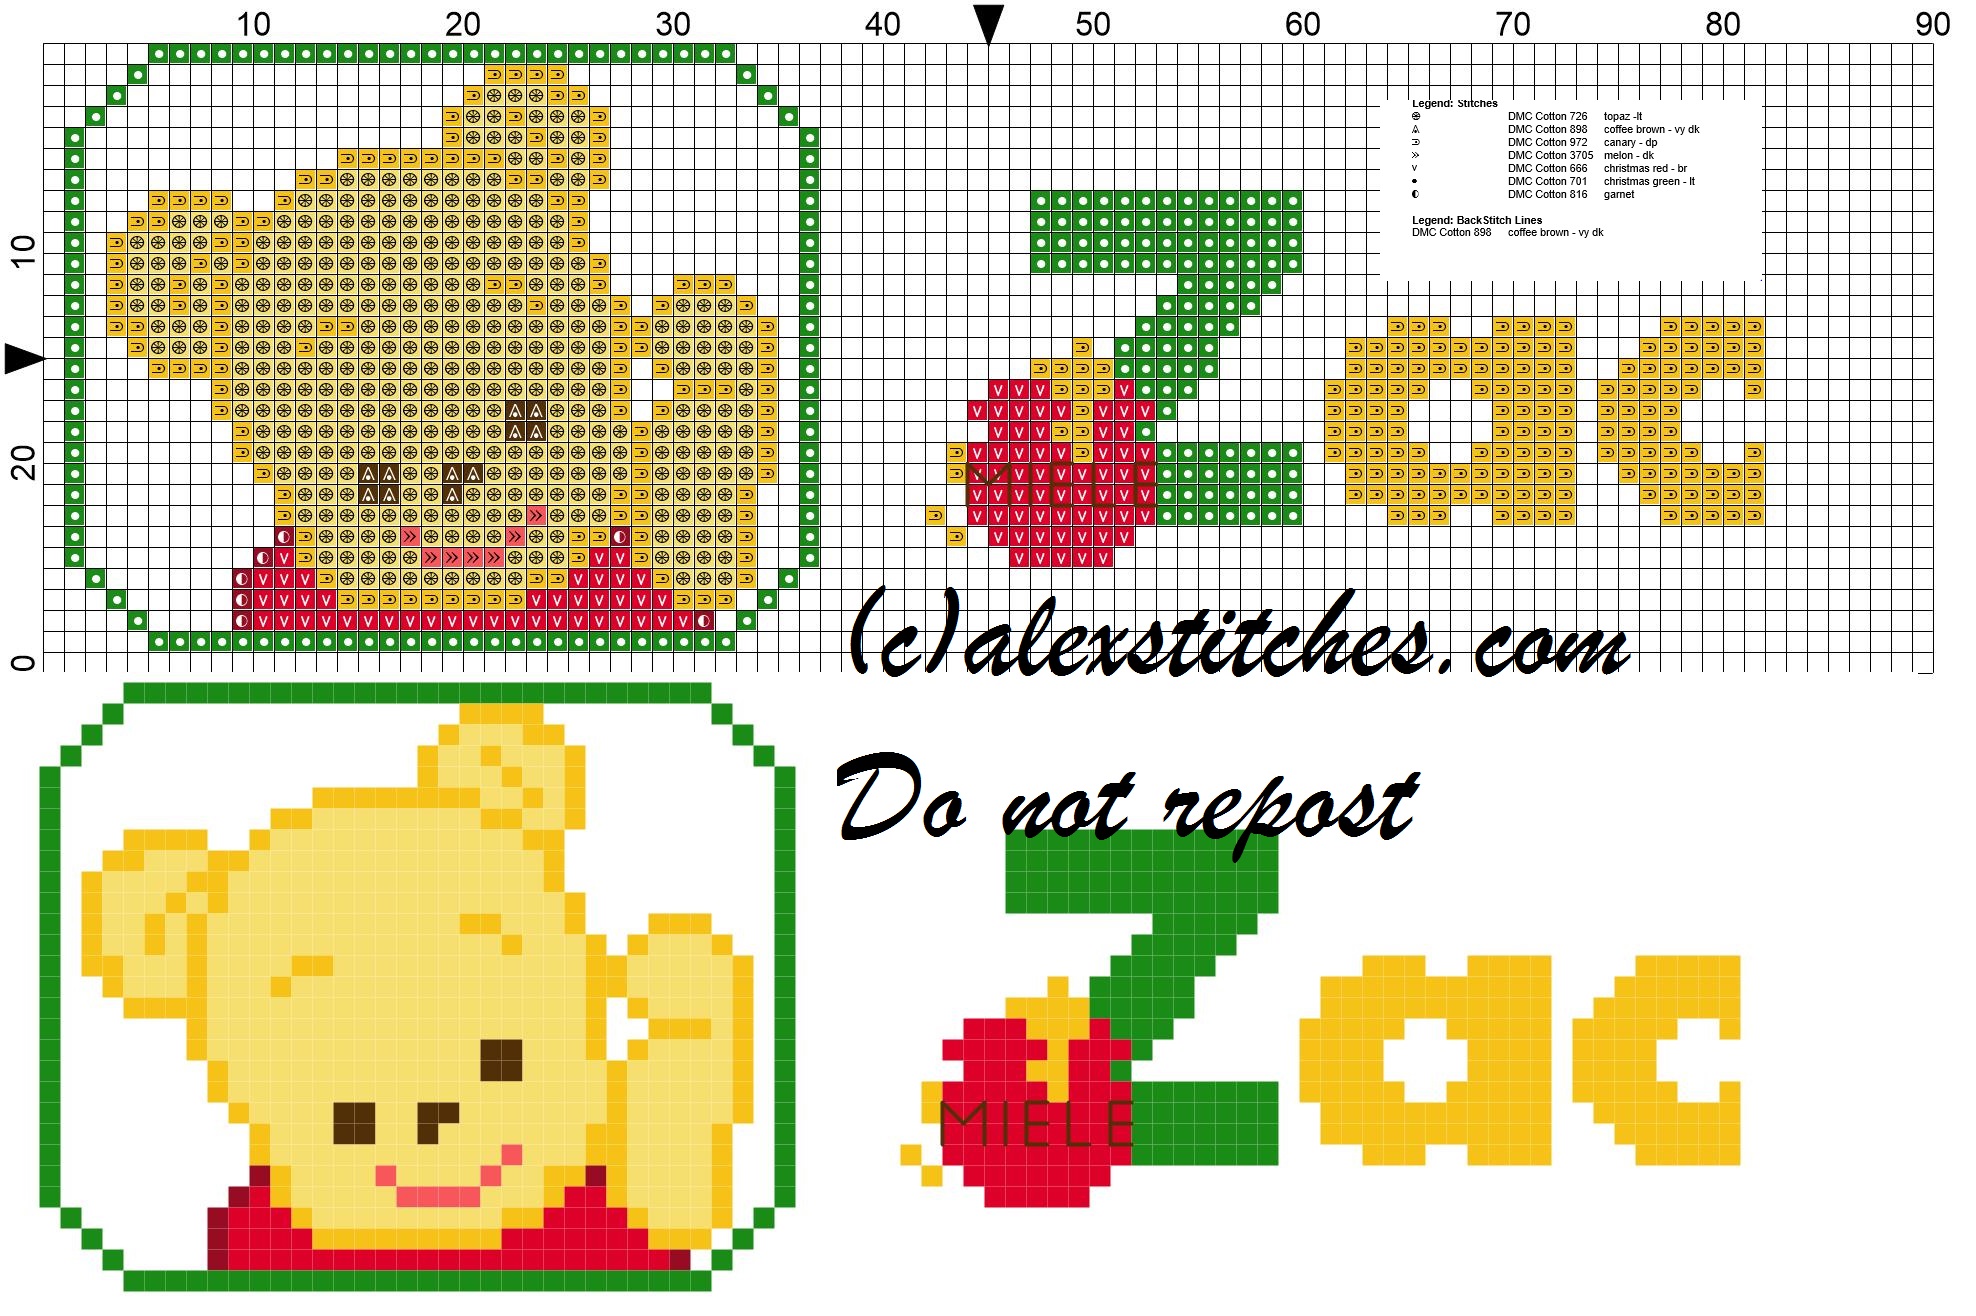 Zac name with Baby winnie the pooh free cross stitches pattern